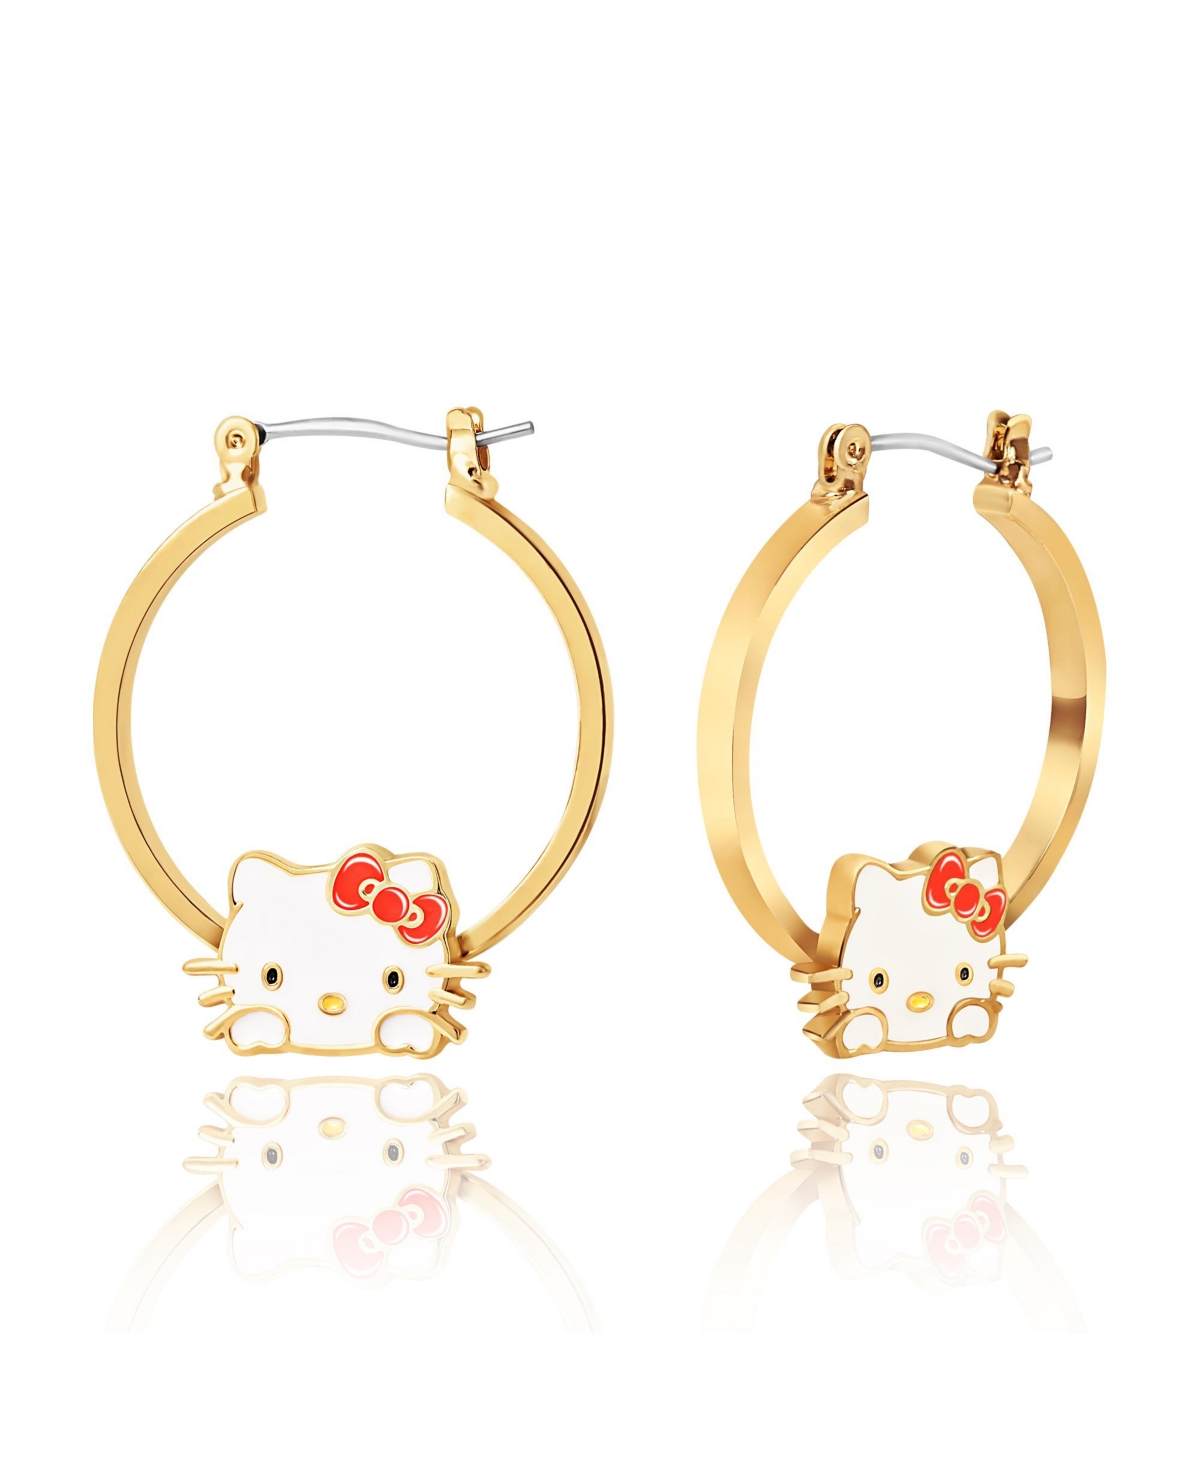 Sanrio Hello Kitty Hoop Gold Plated and Enamel Earrings, Officially Licensed - Gold tone, red, white